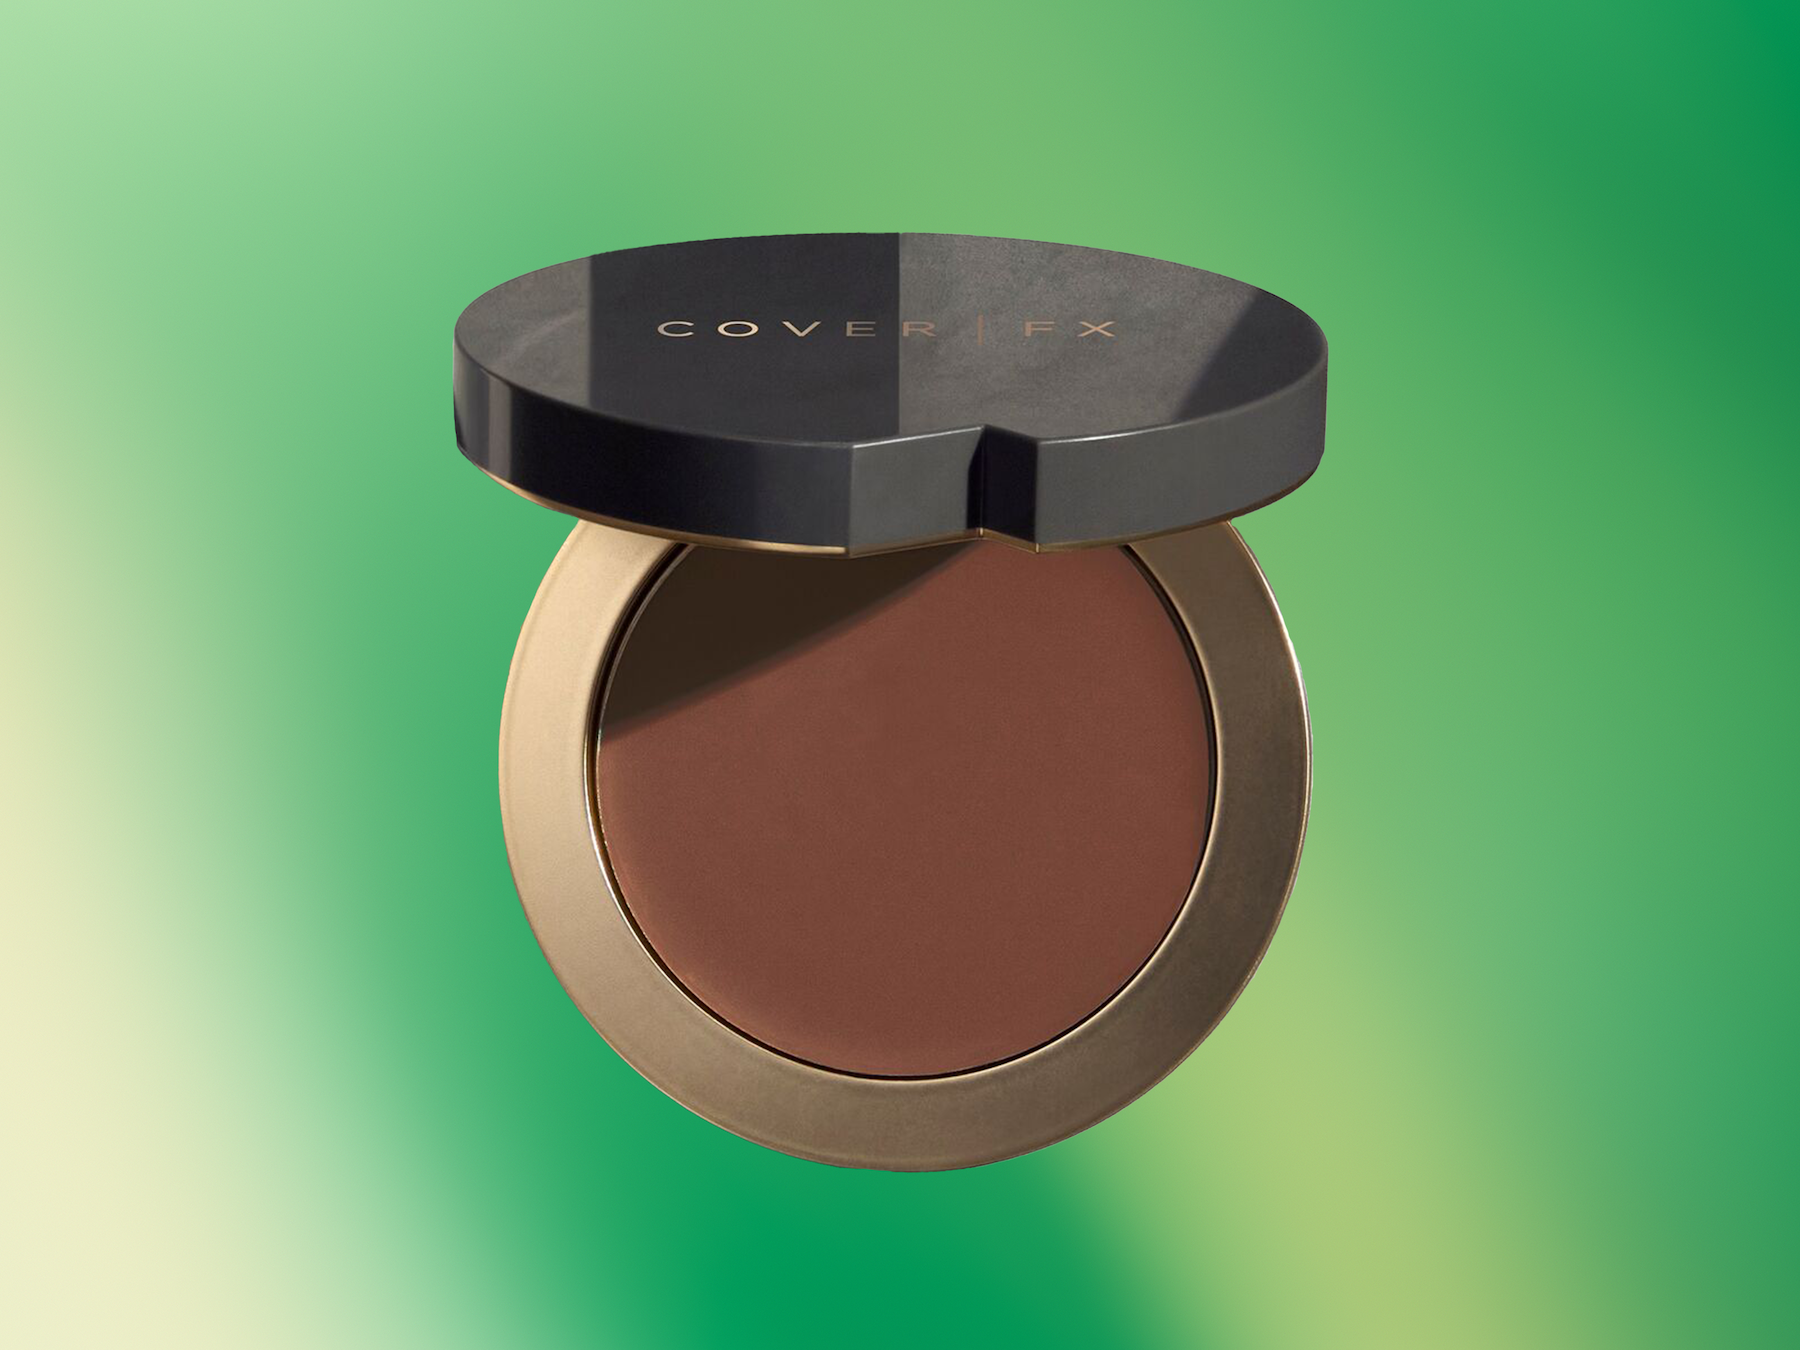 Product Of The Week: Cover FX Total Cover Cream Foundation